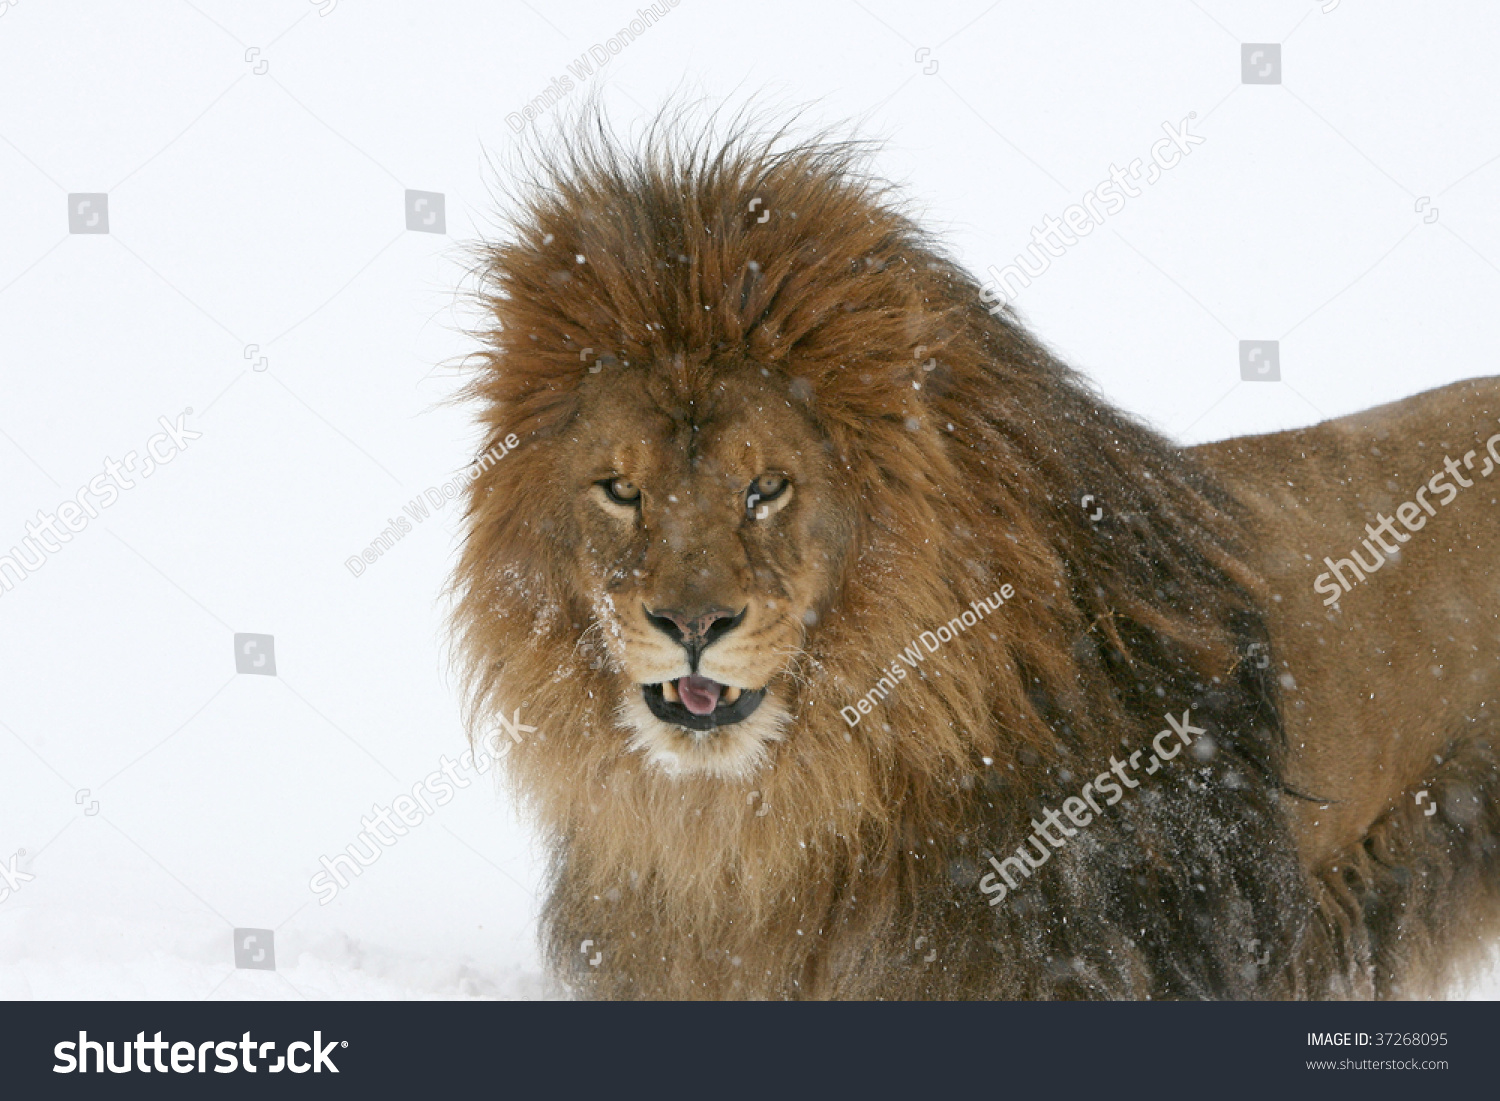 Barbary lion project